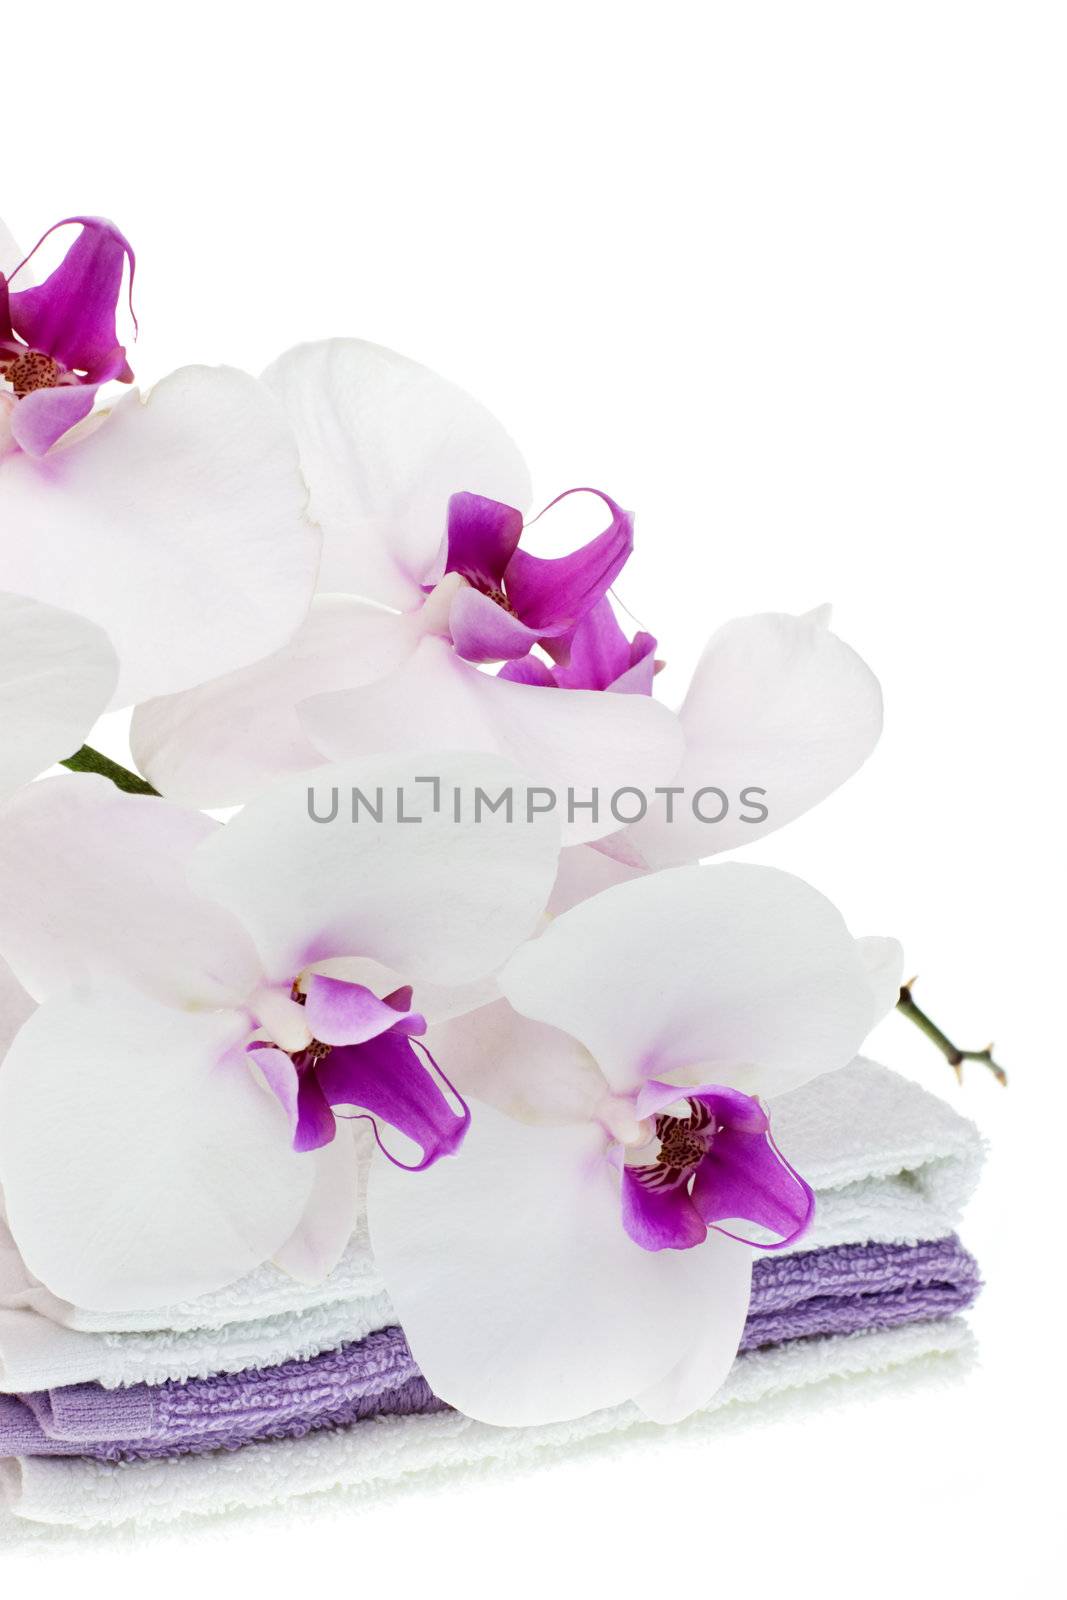 Spa set with white orchid and towels on white background